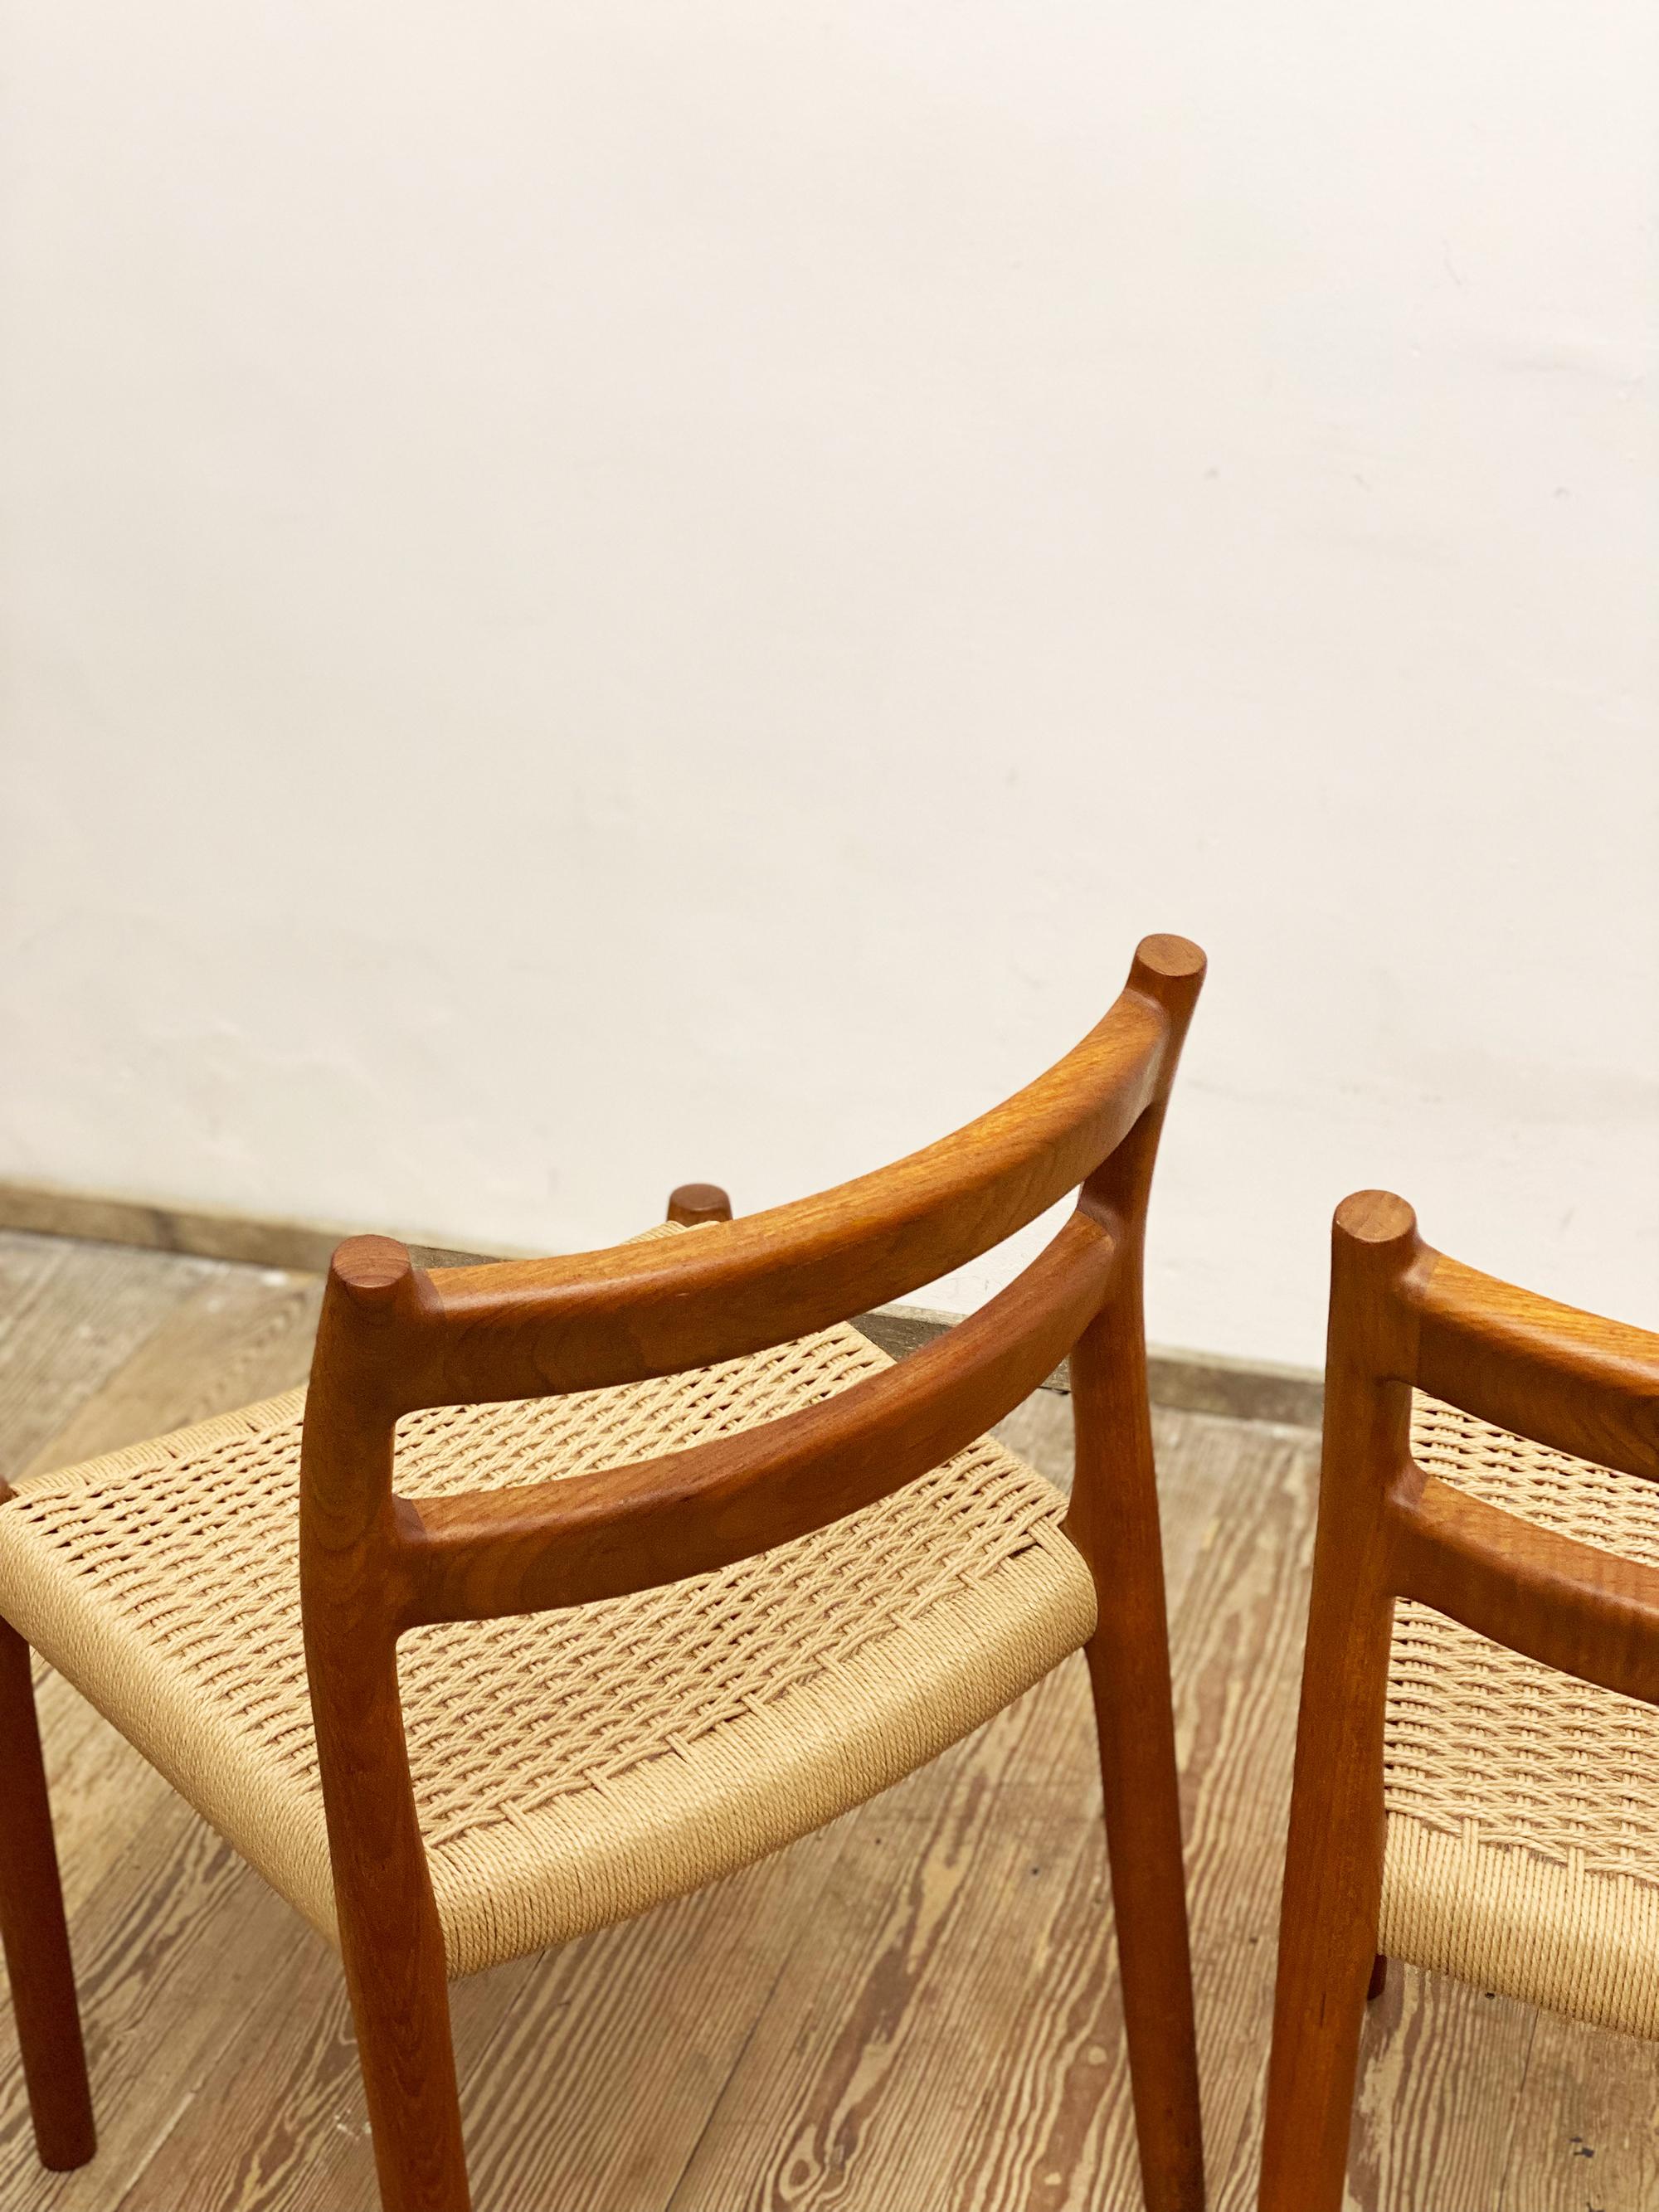 Mid-20th Century 2 Danish Mid-Century Teak Dining Chairs #84 by Niels O. Møller for J. L. Moller For Sale